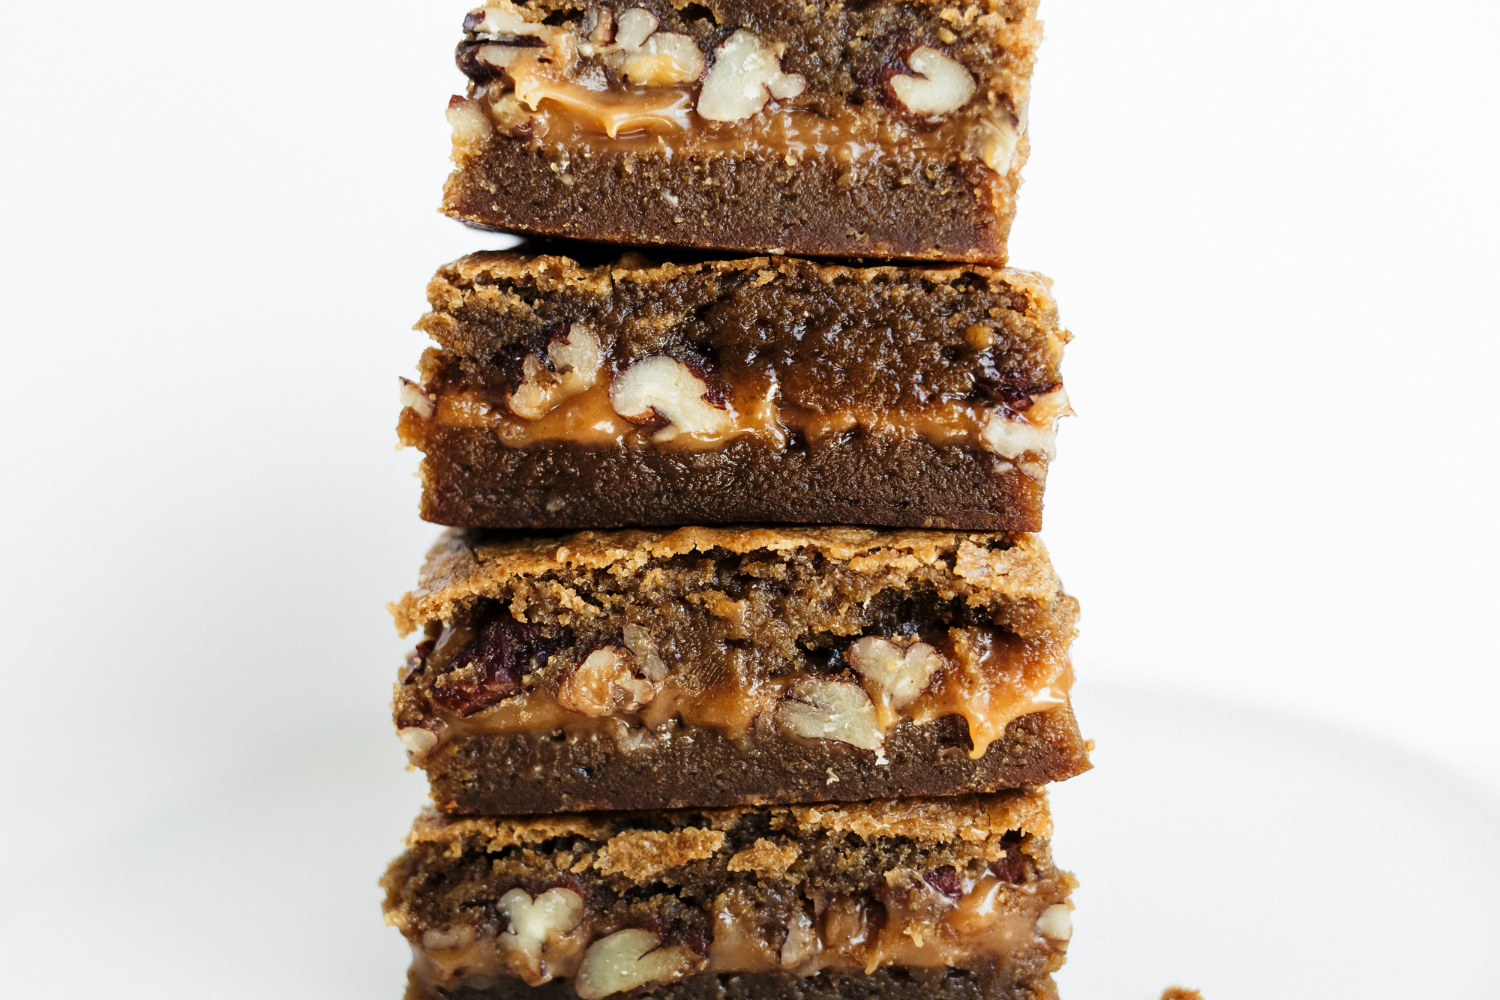 several caramel pecan blondies stacked on top of each other.